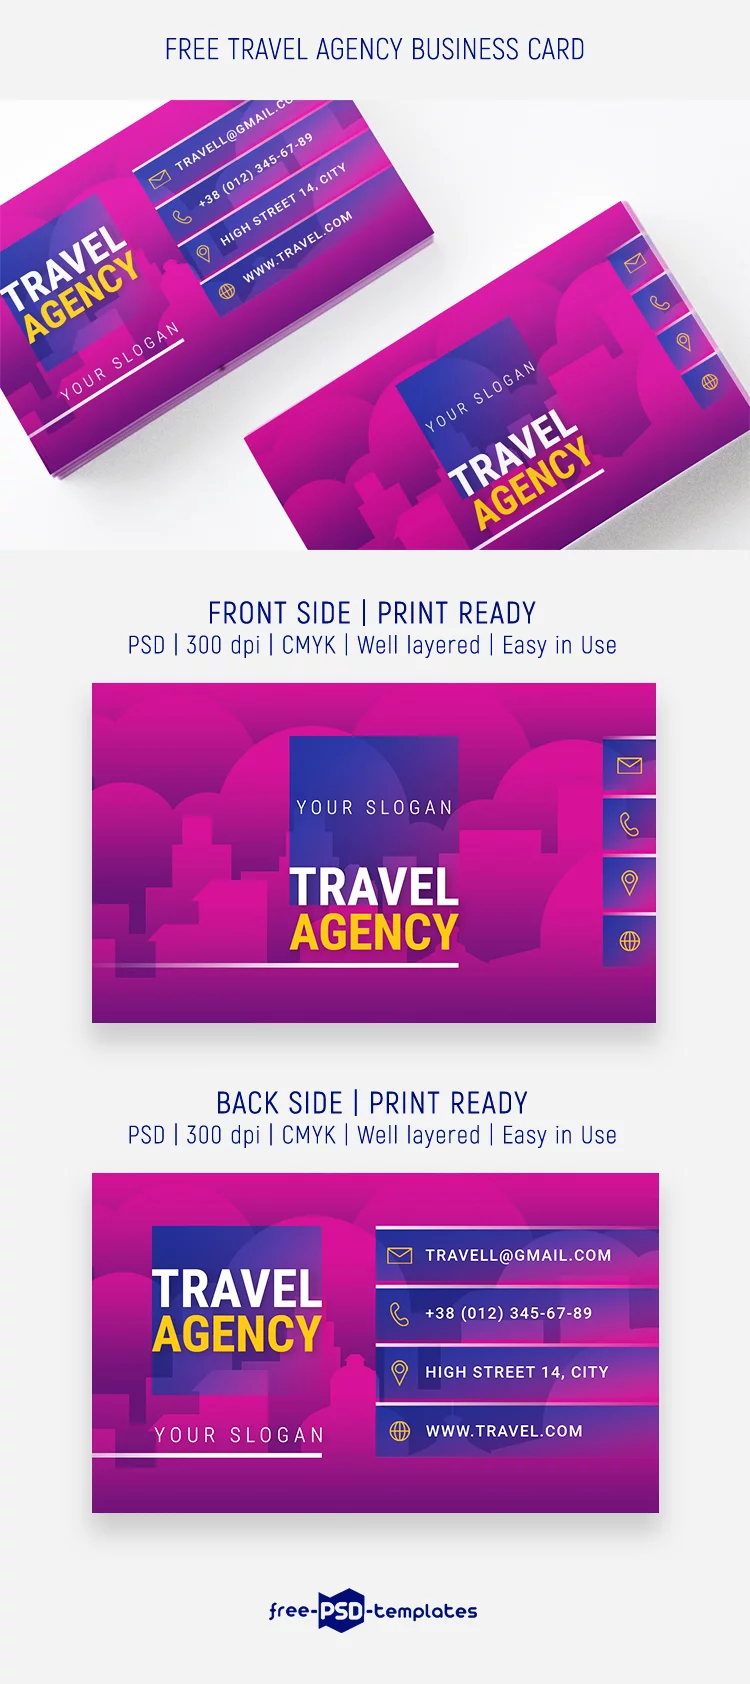 Free Travel Agency Business Card